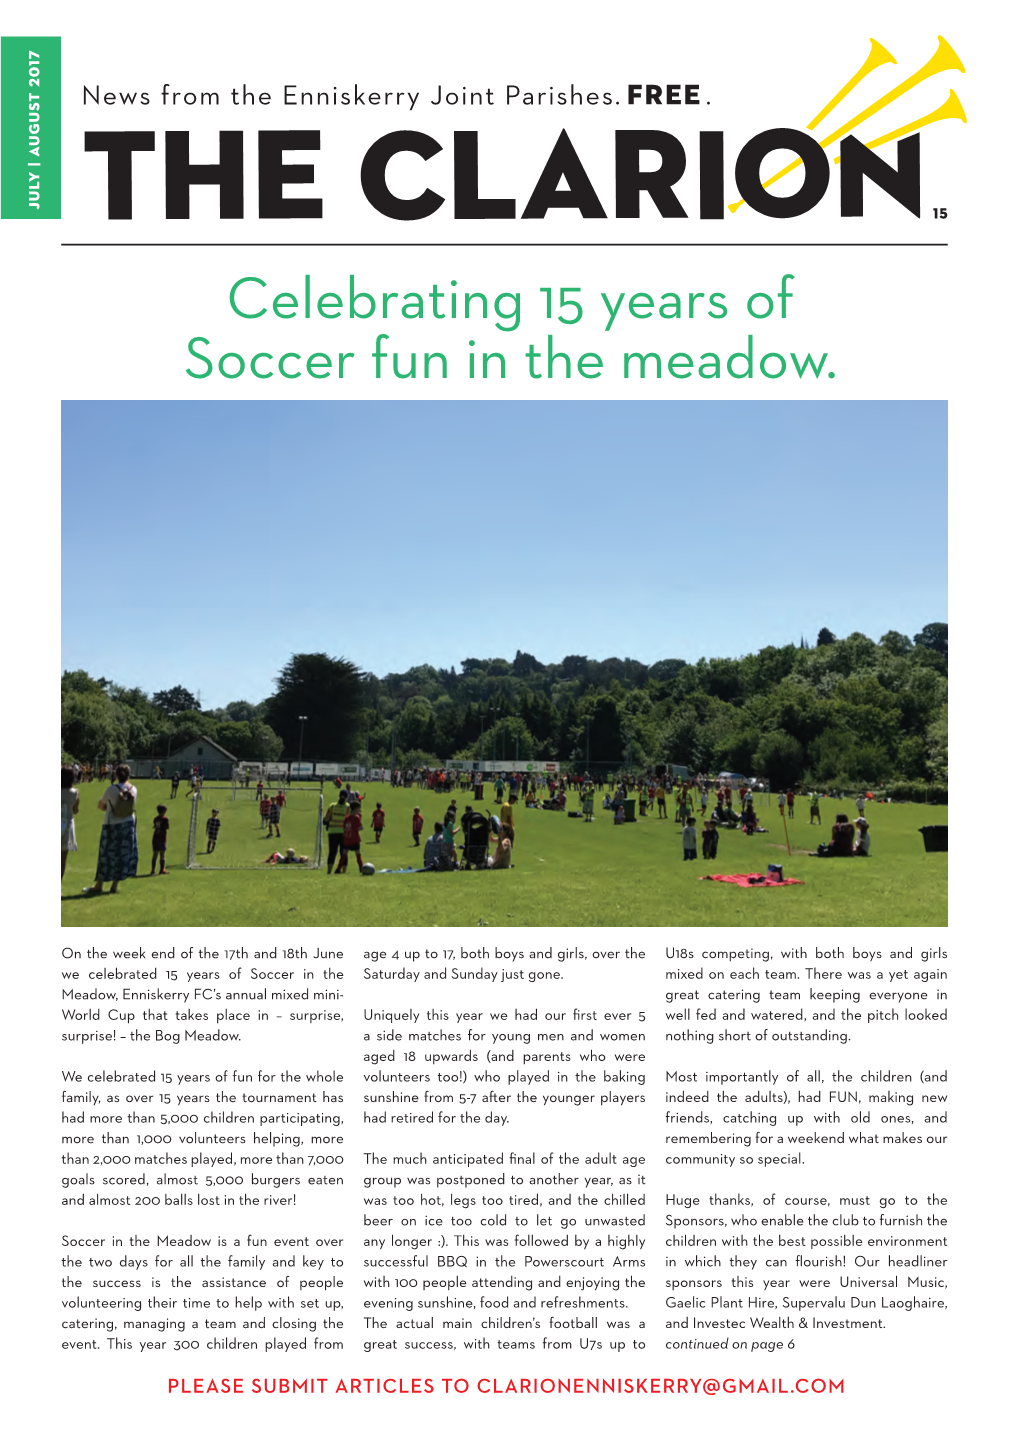 Celebrating 15 Years of Soccer Fun in the Meadow